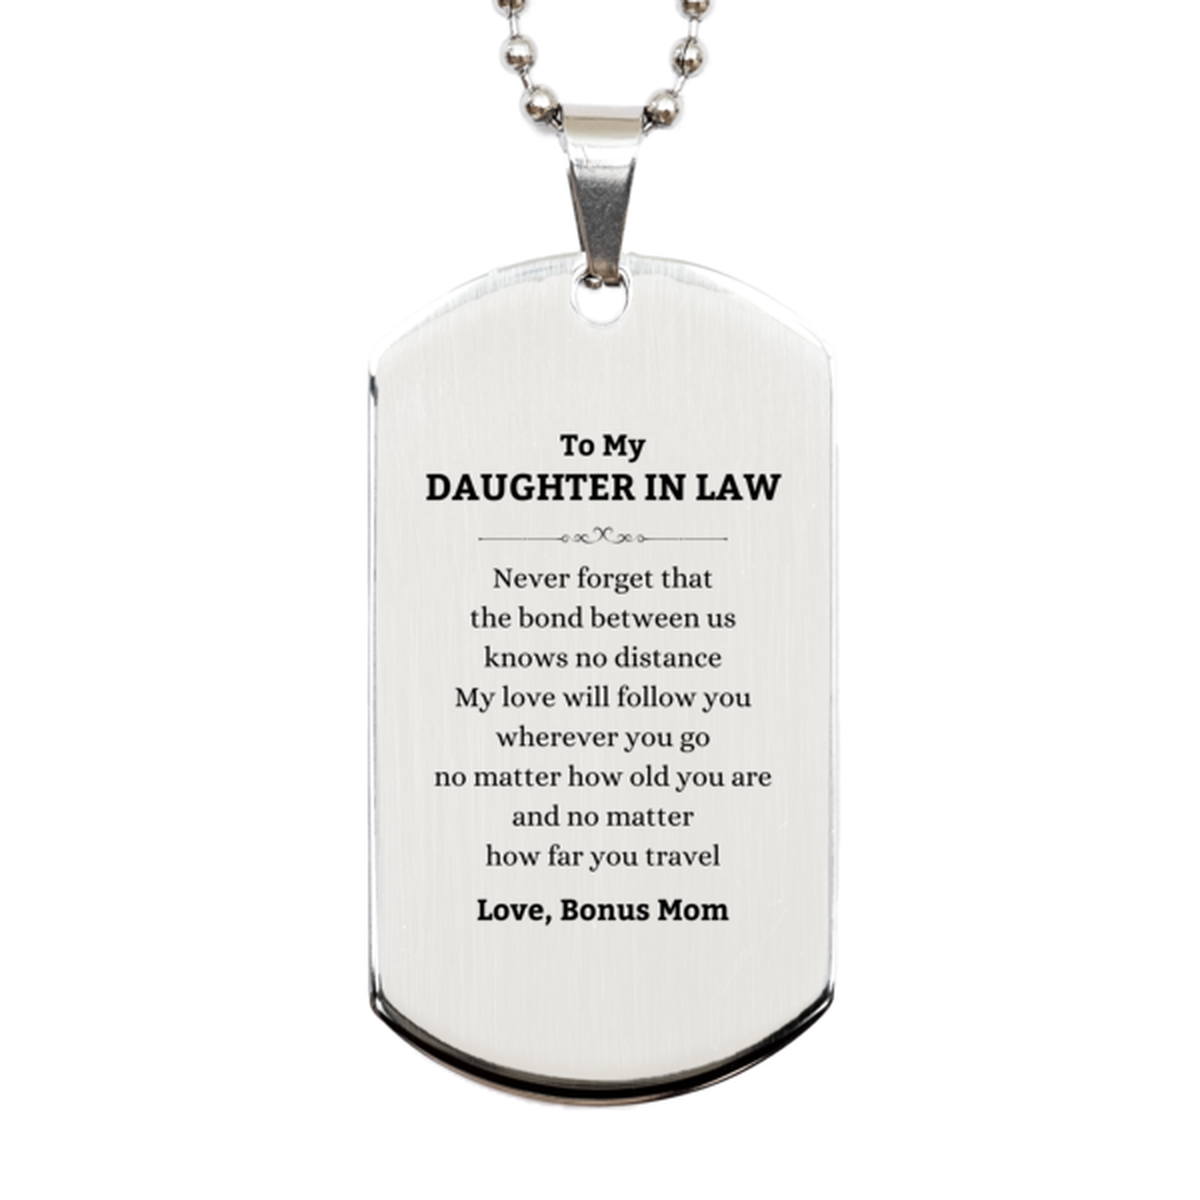 Daughter In Law Birthday Gifts from Bonus Mom, Adjustable Silver Dog Tag for Daughter In Law Christmas Graduation Unique Gifts Daughter In Law Never forget that the bond between us knows no distance. Love, Bonus Mom